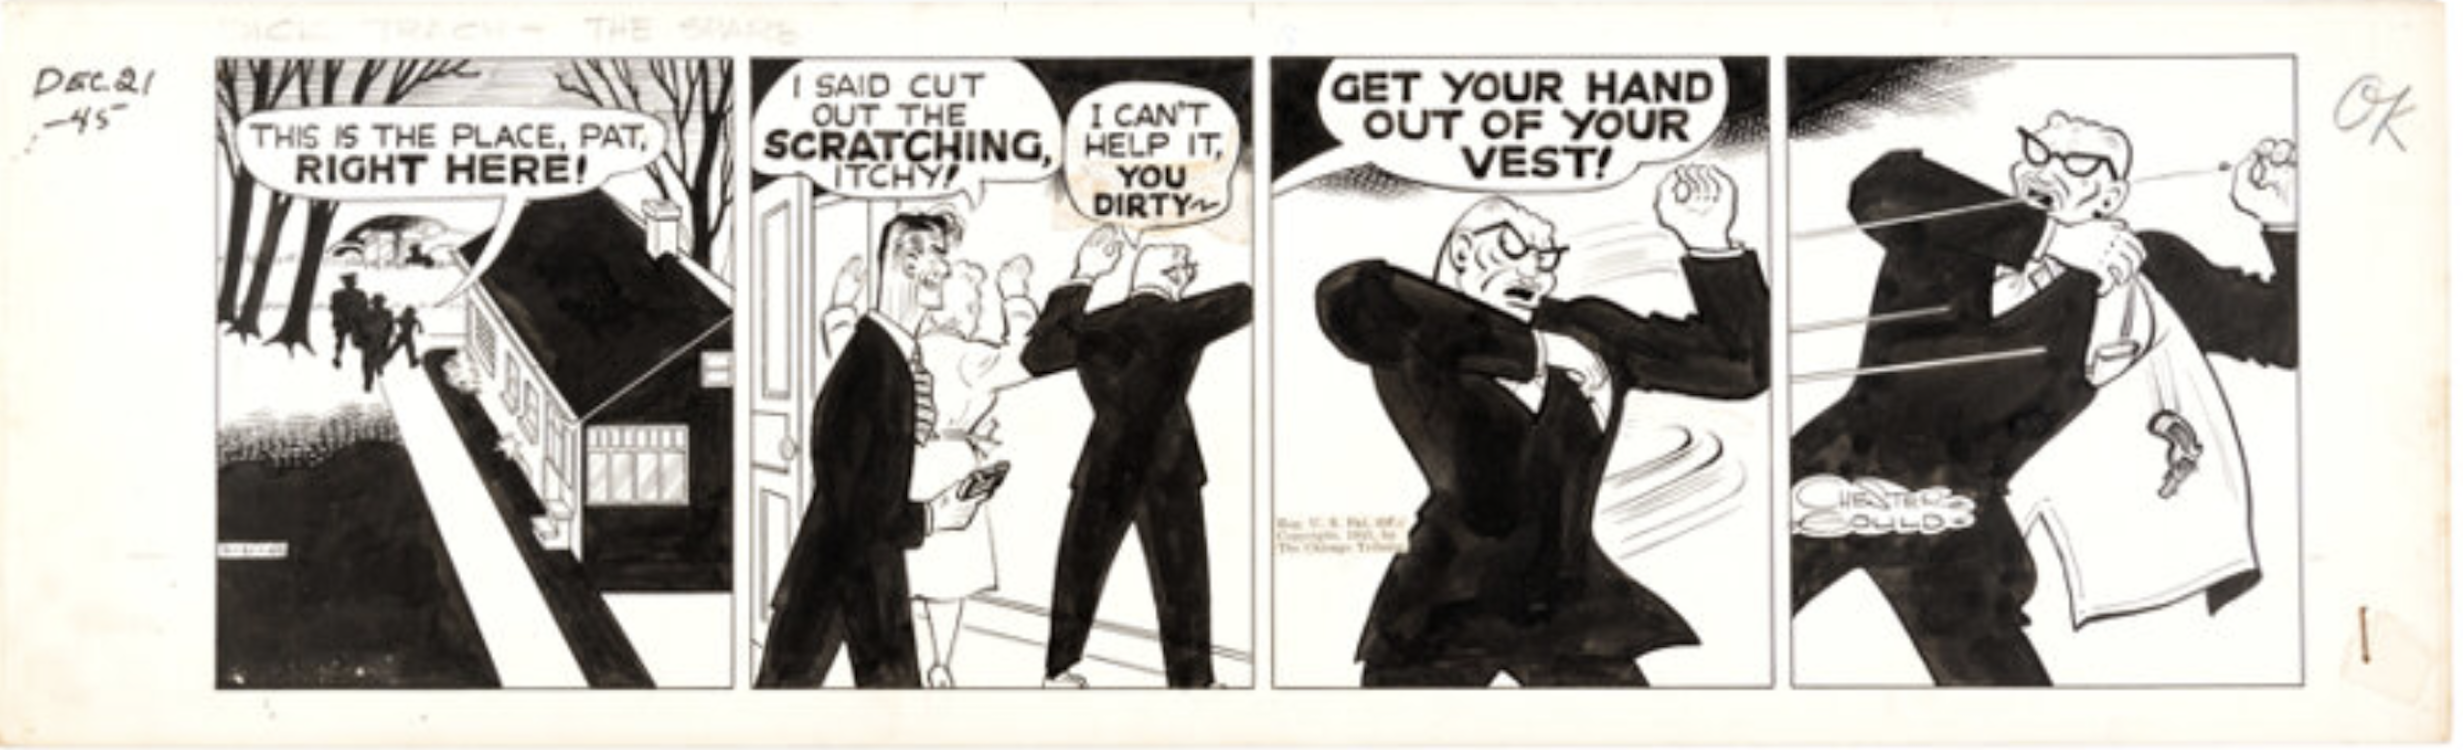 Dick Tracy Daily Comic Strip 12-21-5 by Chester Gould sold for $5,520. Click here to get your original art appraised.